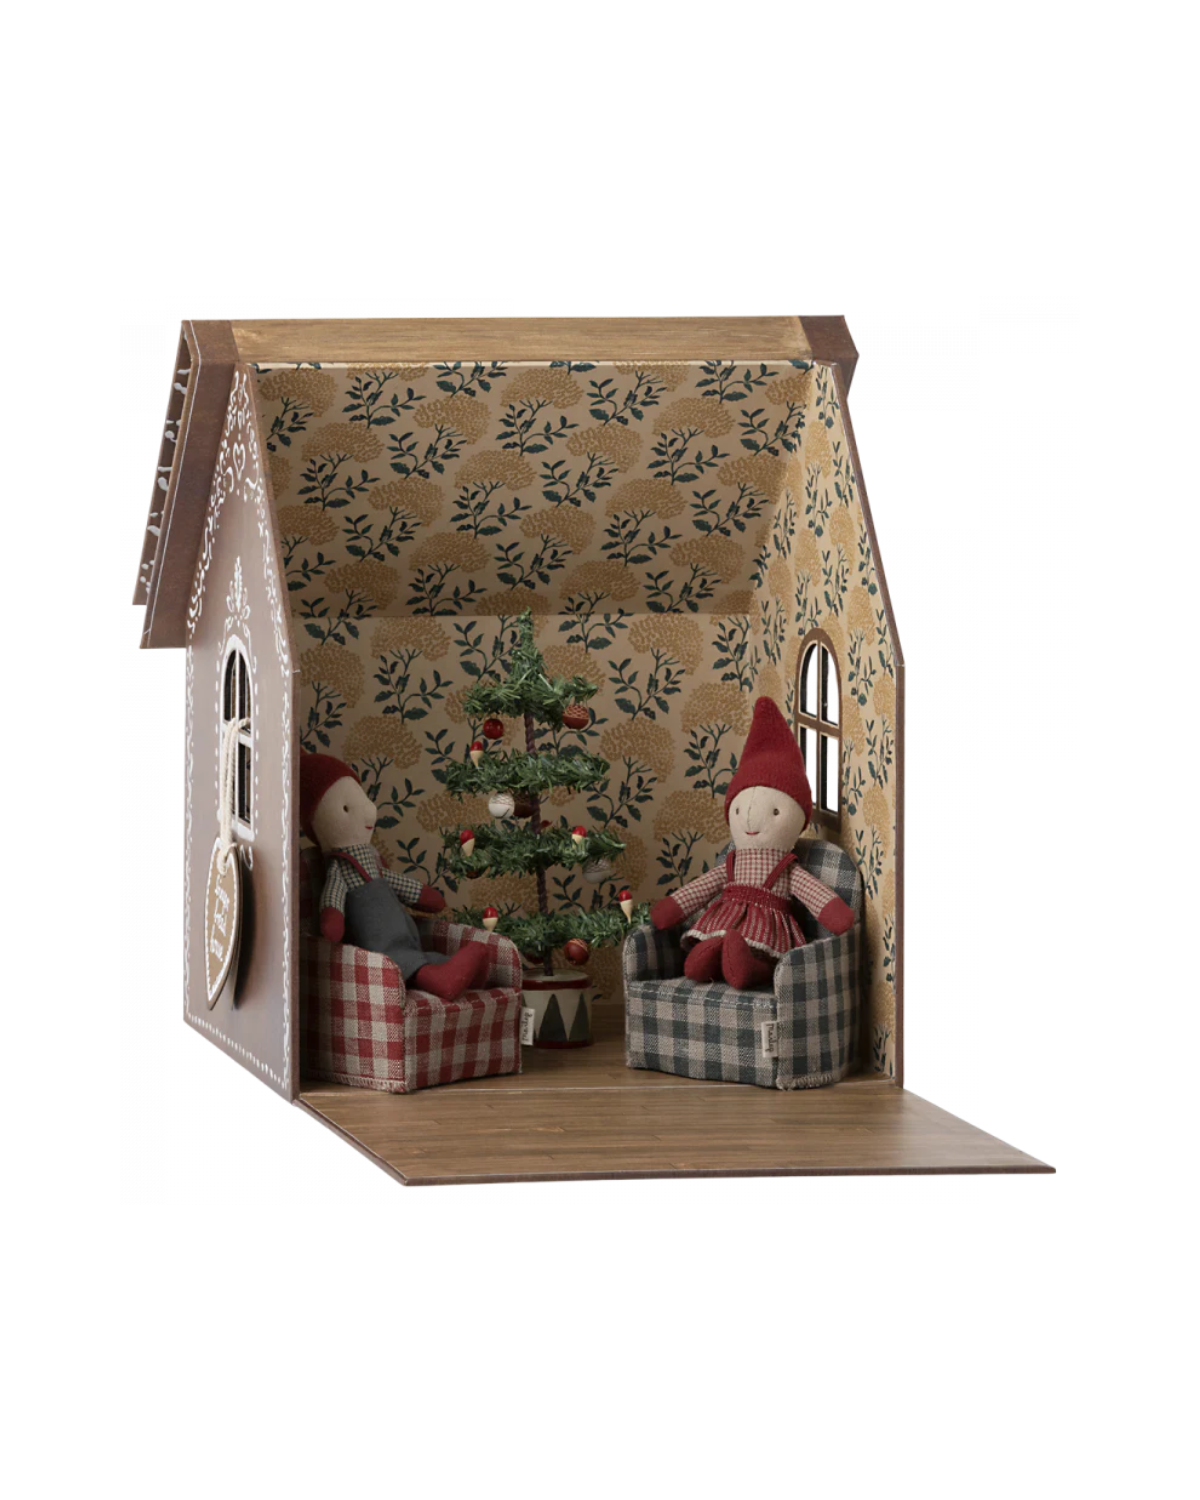 Maileg Small Gingerbread House - Charming Holiday Decor